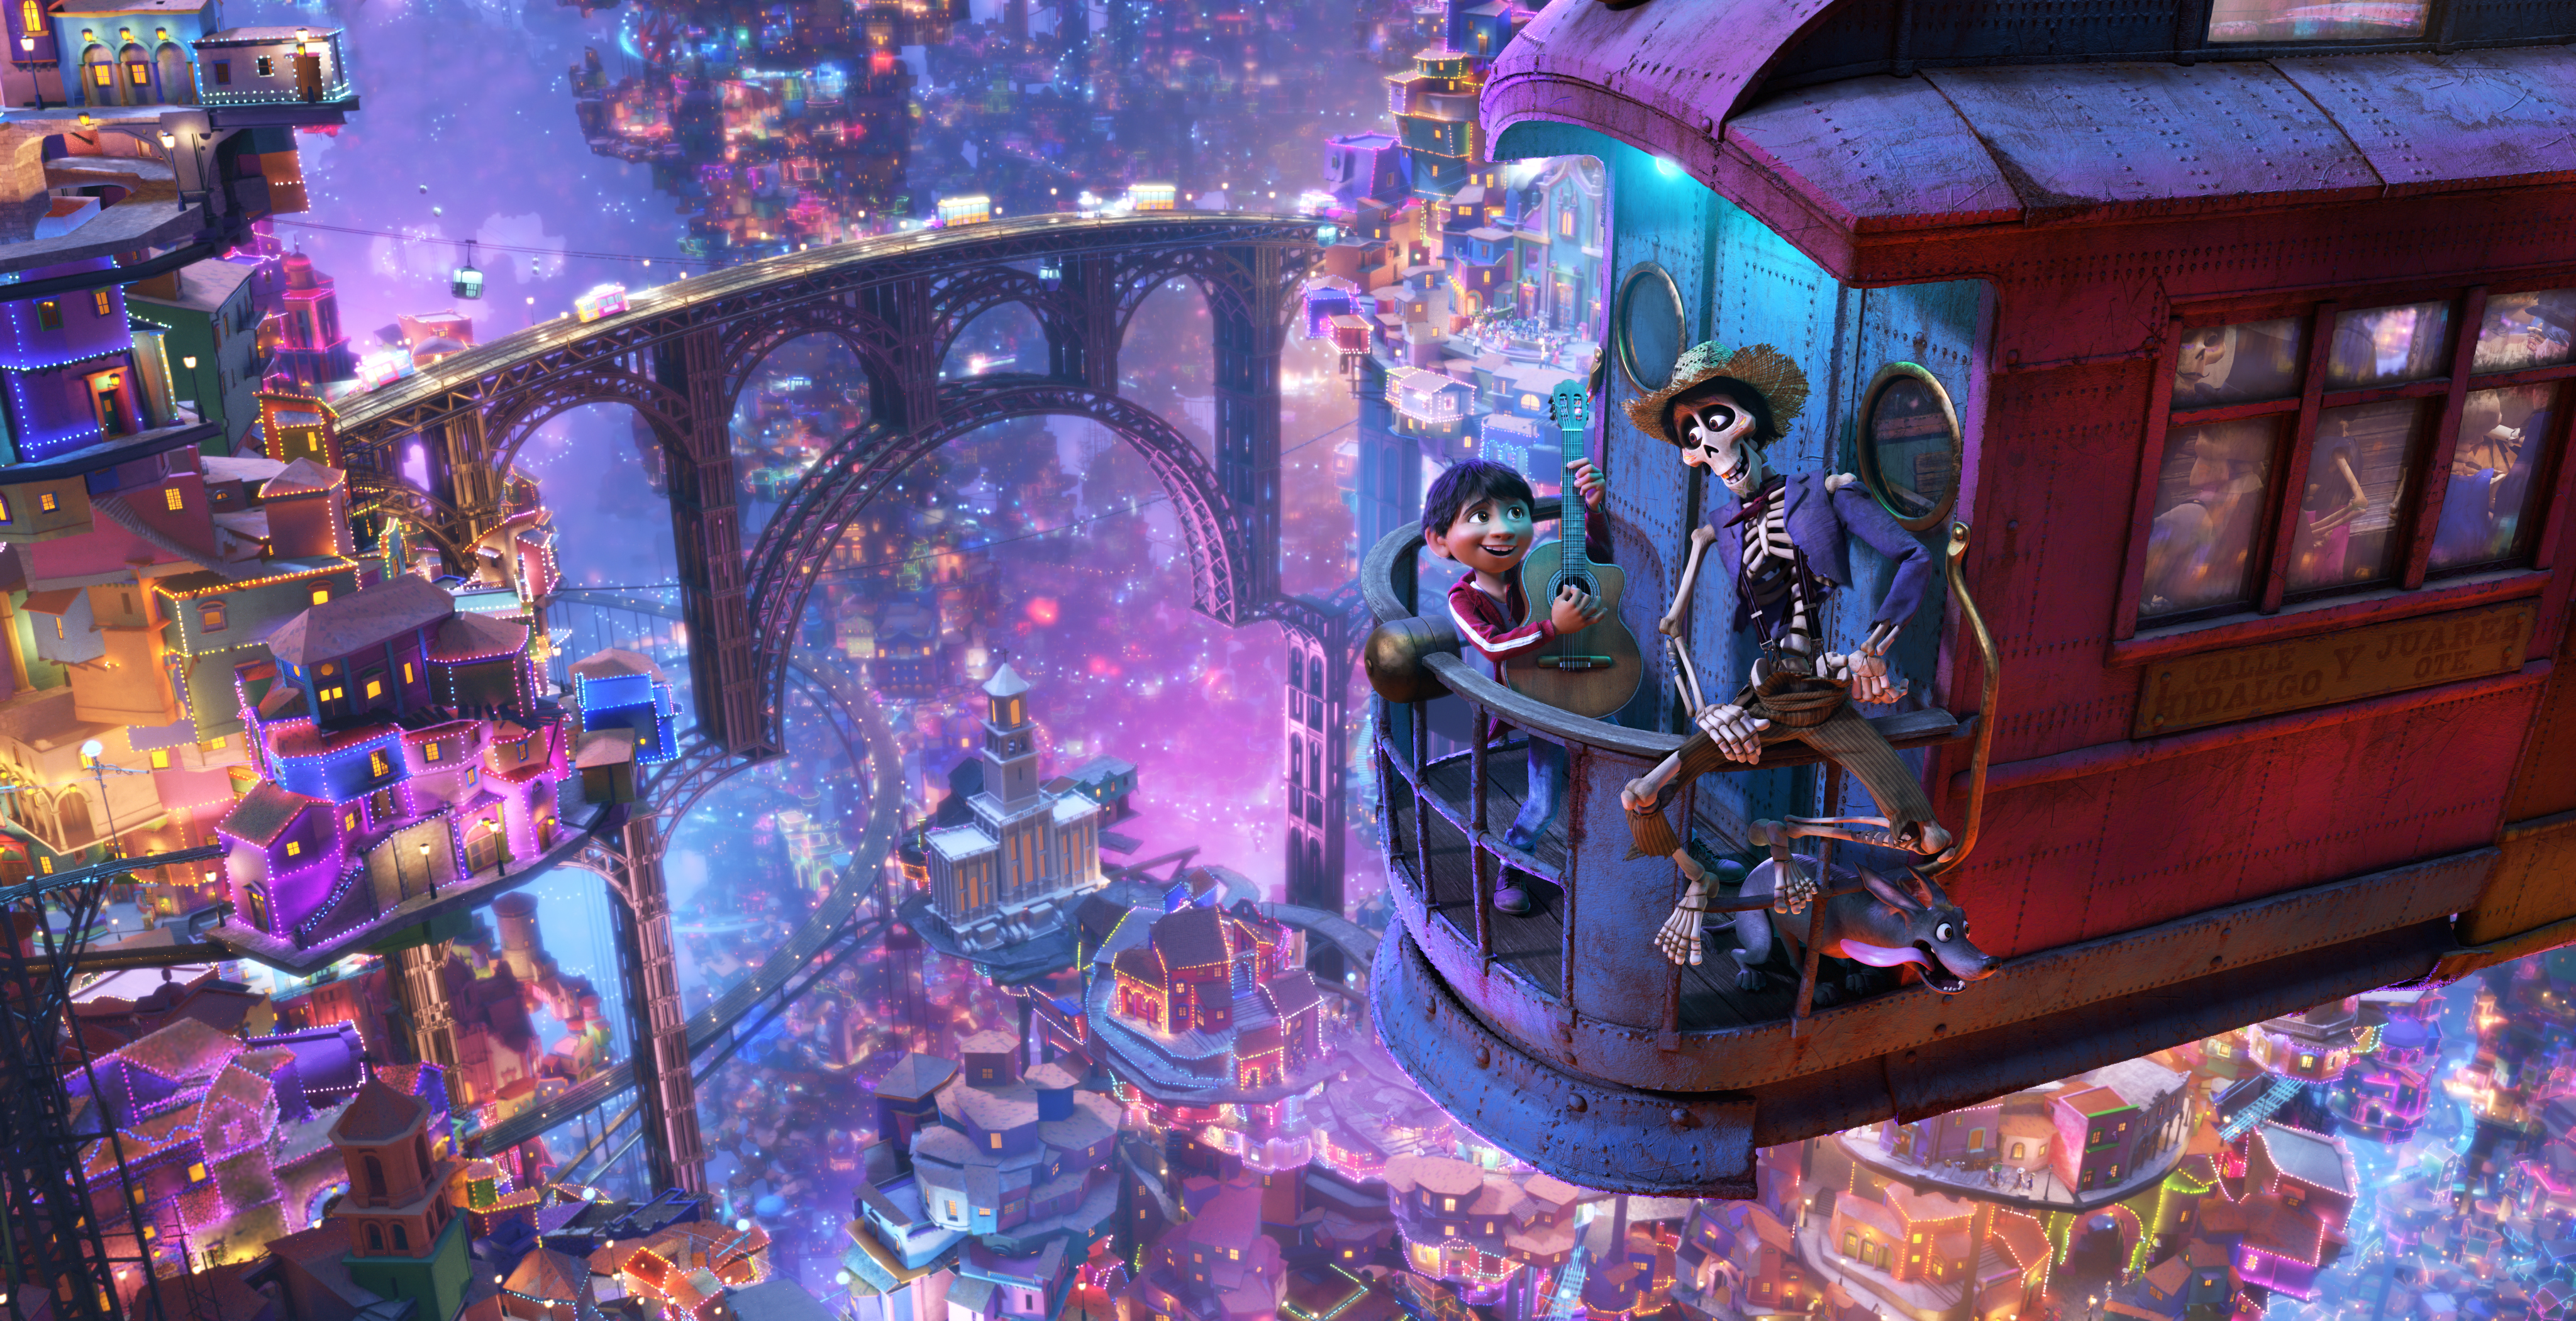 Disney-Pixar’s Coco – An Attraction that is Dying to be Made!